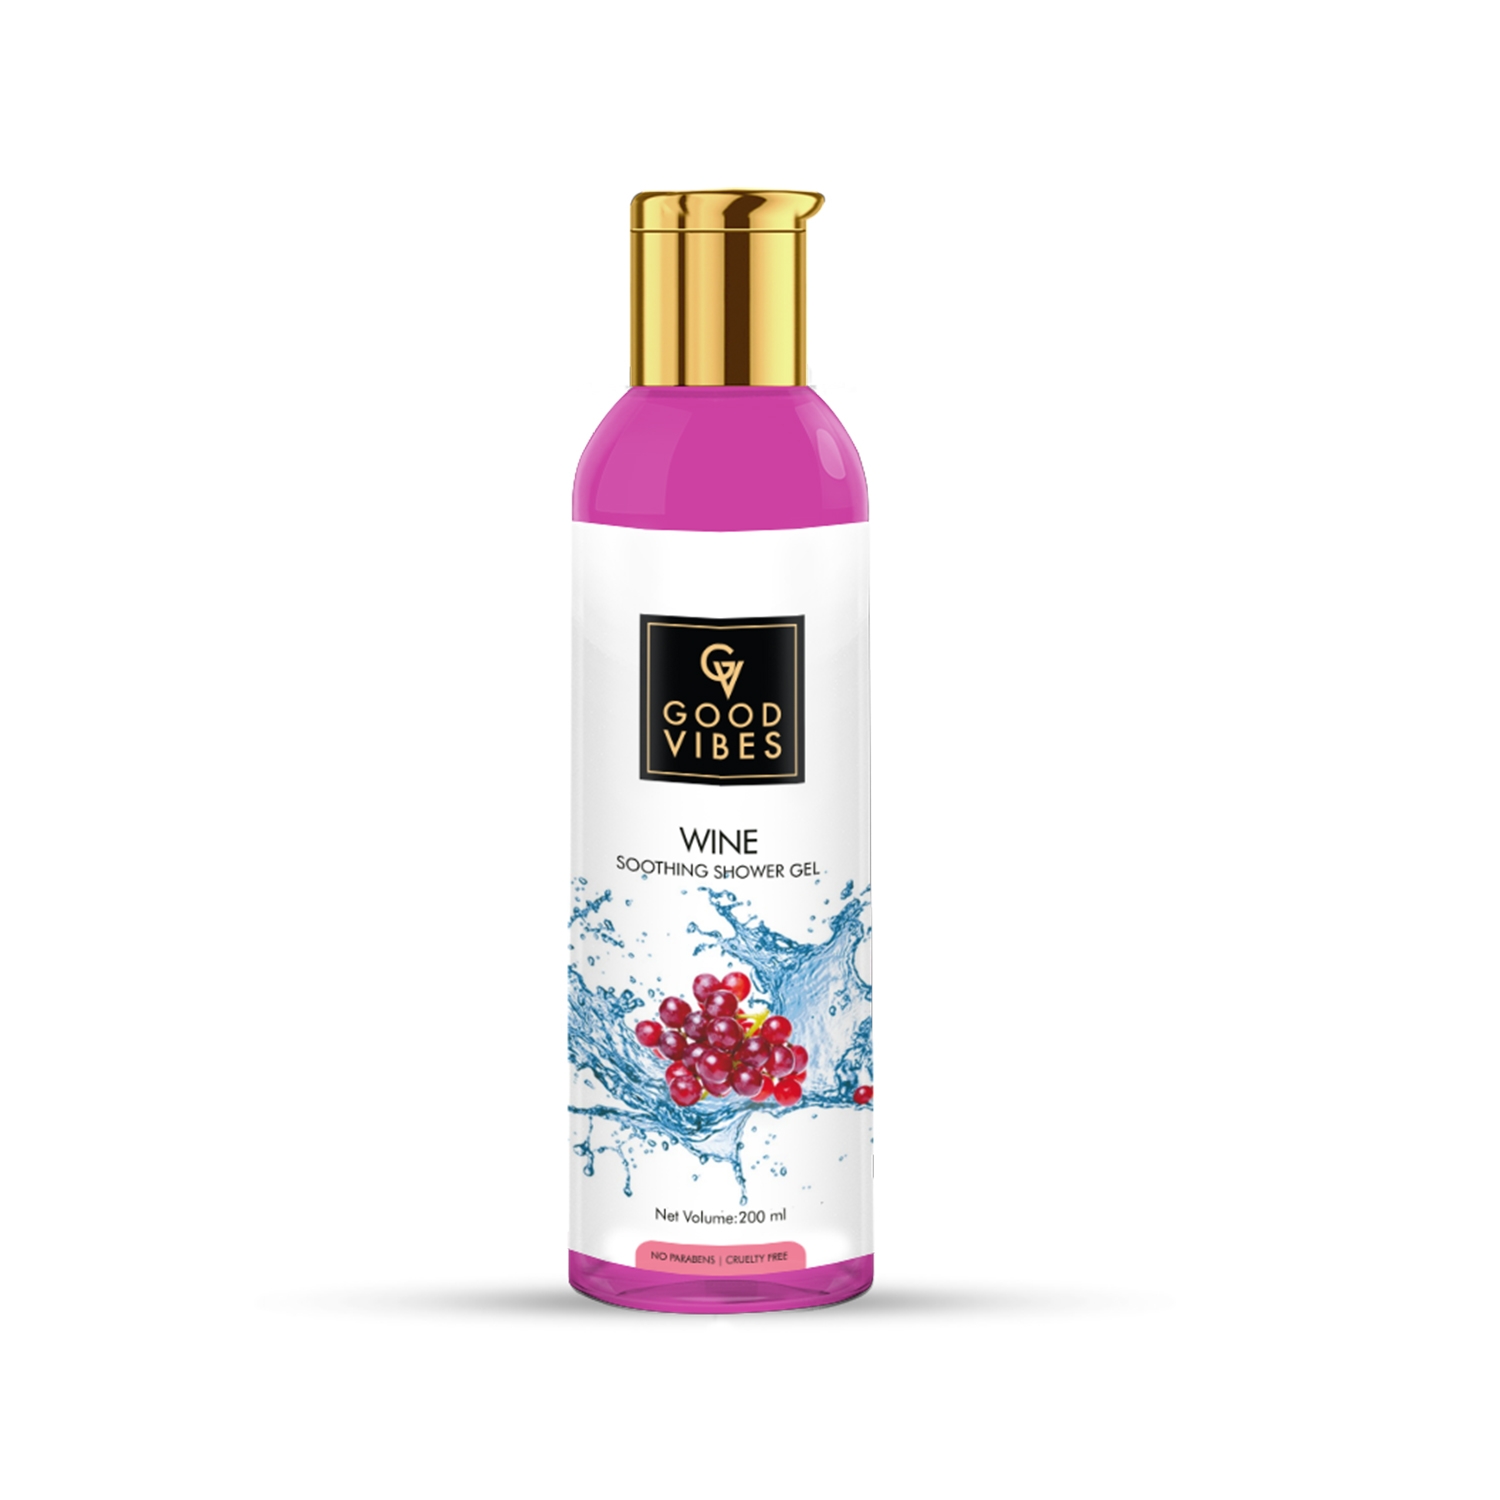 Good Vibes | Good Vibes Soothing Shower Gel (Body Wash) - Wine (200 ml)